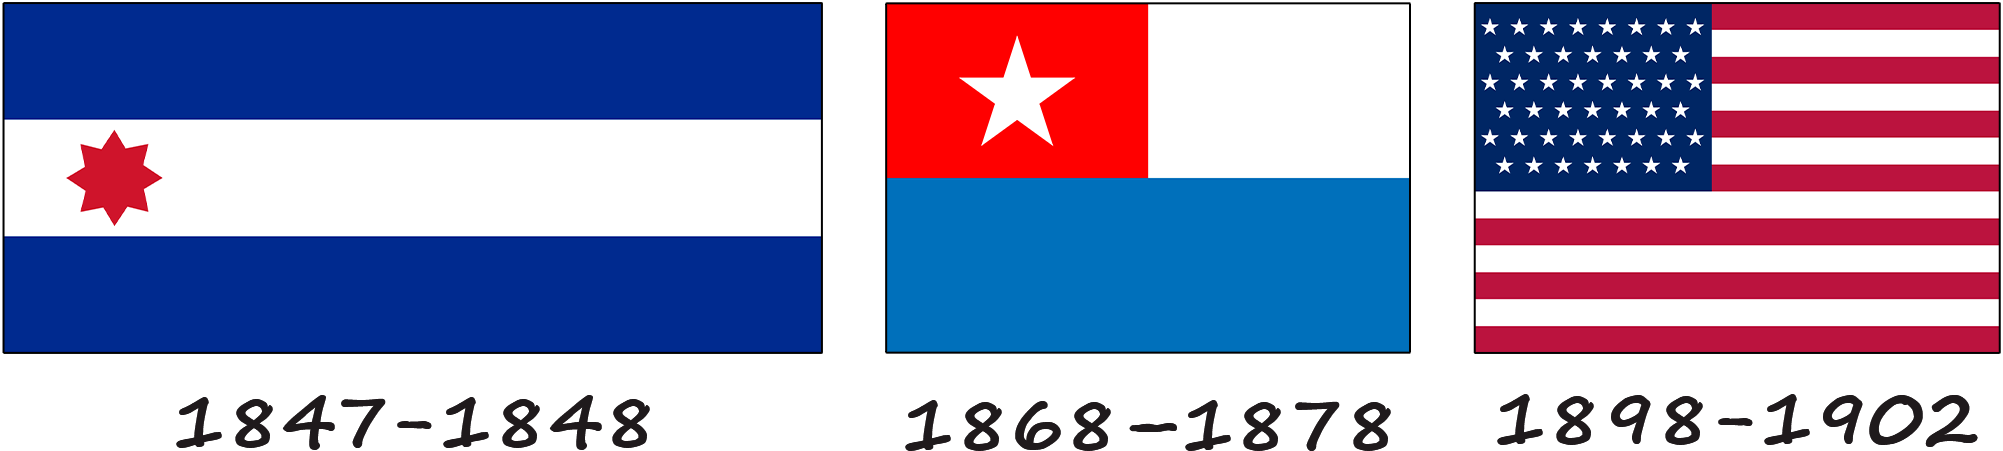 History of the Cuban flag